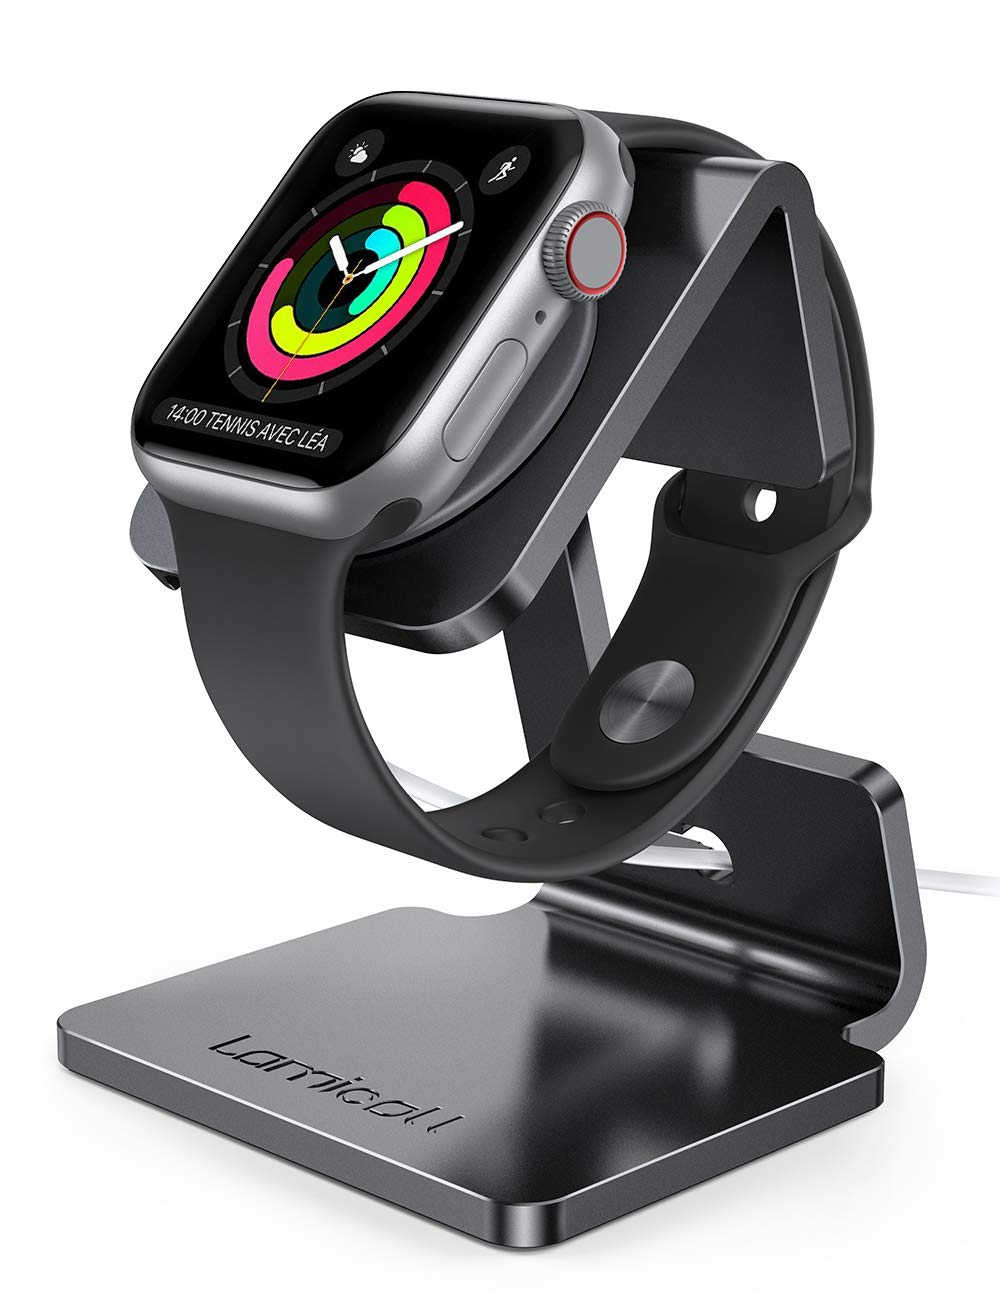 Lamicall Stand Suit for Apple Watch, Charging Stand : Desk Watch Stand Holder Charging Dock Station Compatible with Apple Watch Series 7/SE 45mm 41mm Series 6/5/4/3/2/1 / 44mm/42mm/40mm/38mm - Black